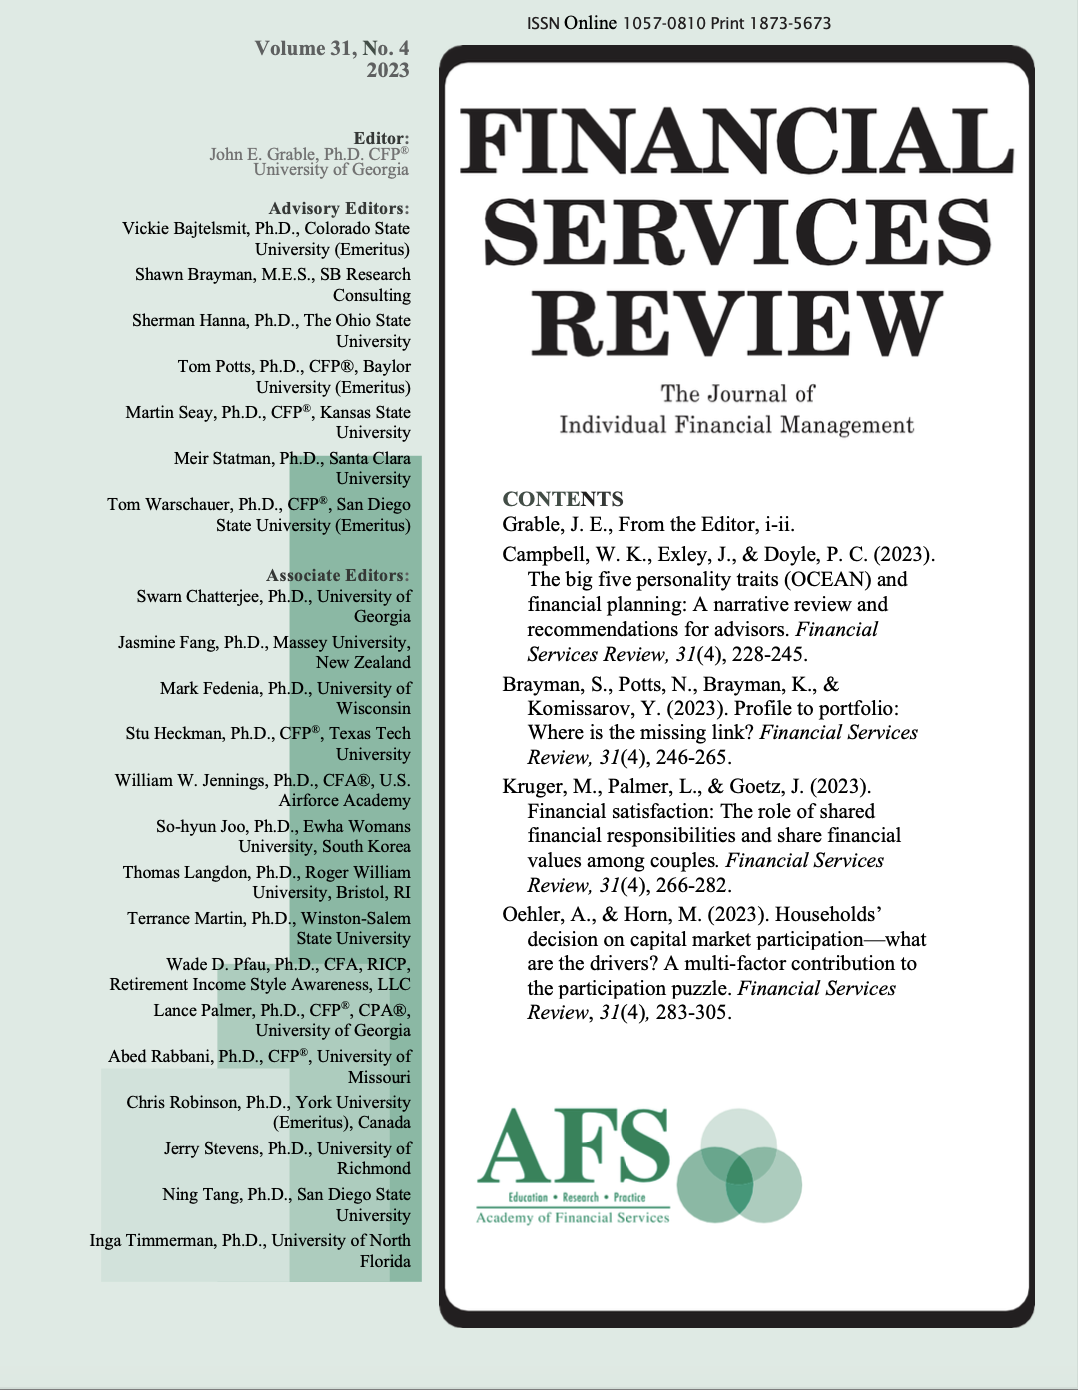 					View Vol. 31 No. 4 (2023): Financial Services Review
				